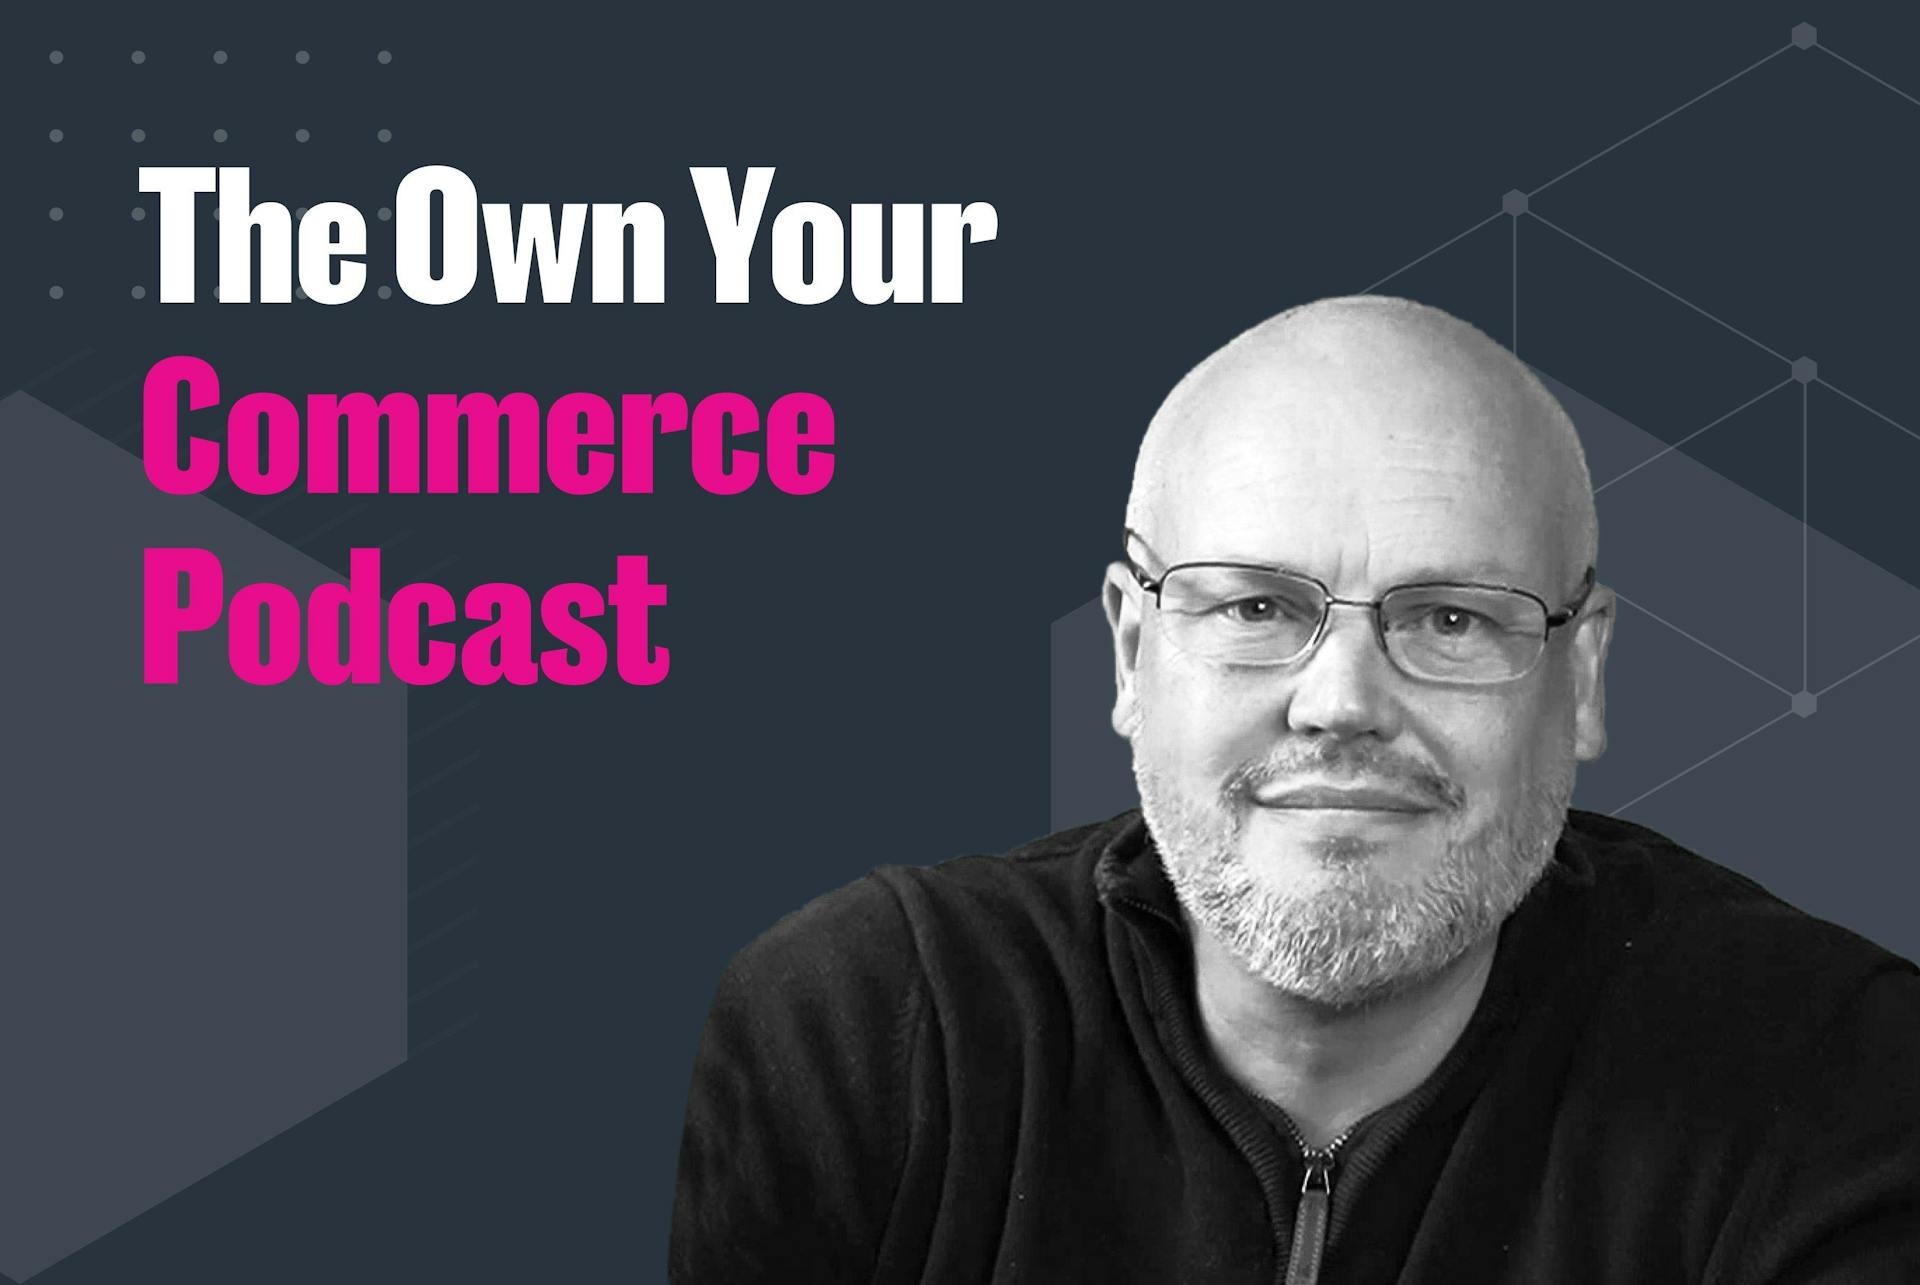 OWN YOUR COMMERCE podcast